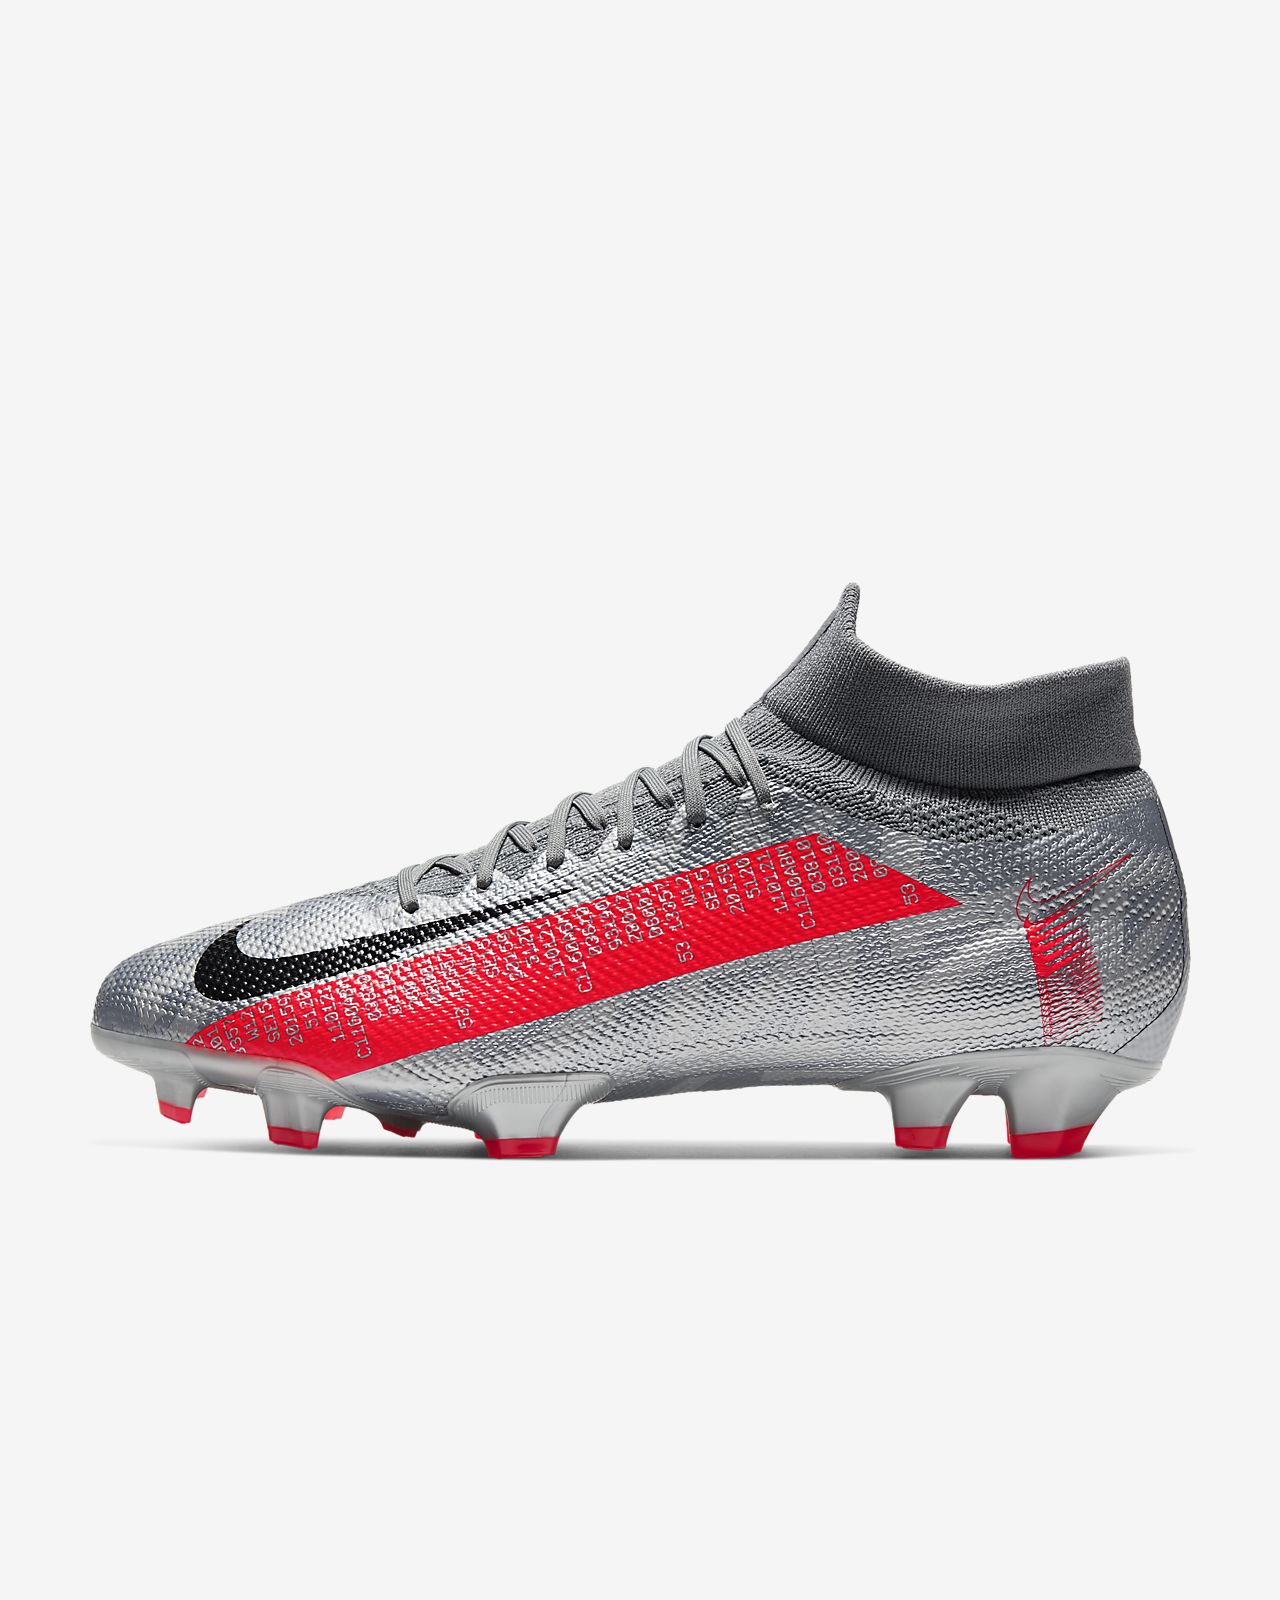 Mercurial Superfly 6 Academy MG Multi Ground Soccer Cleat.